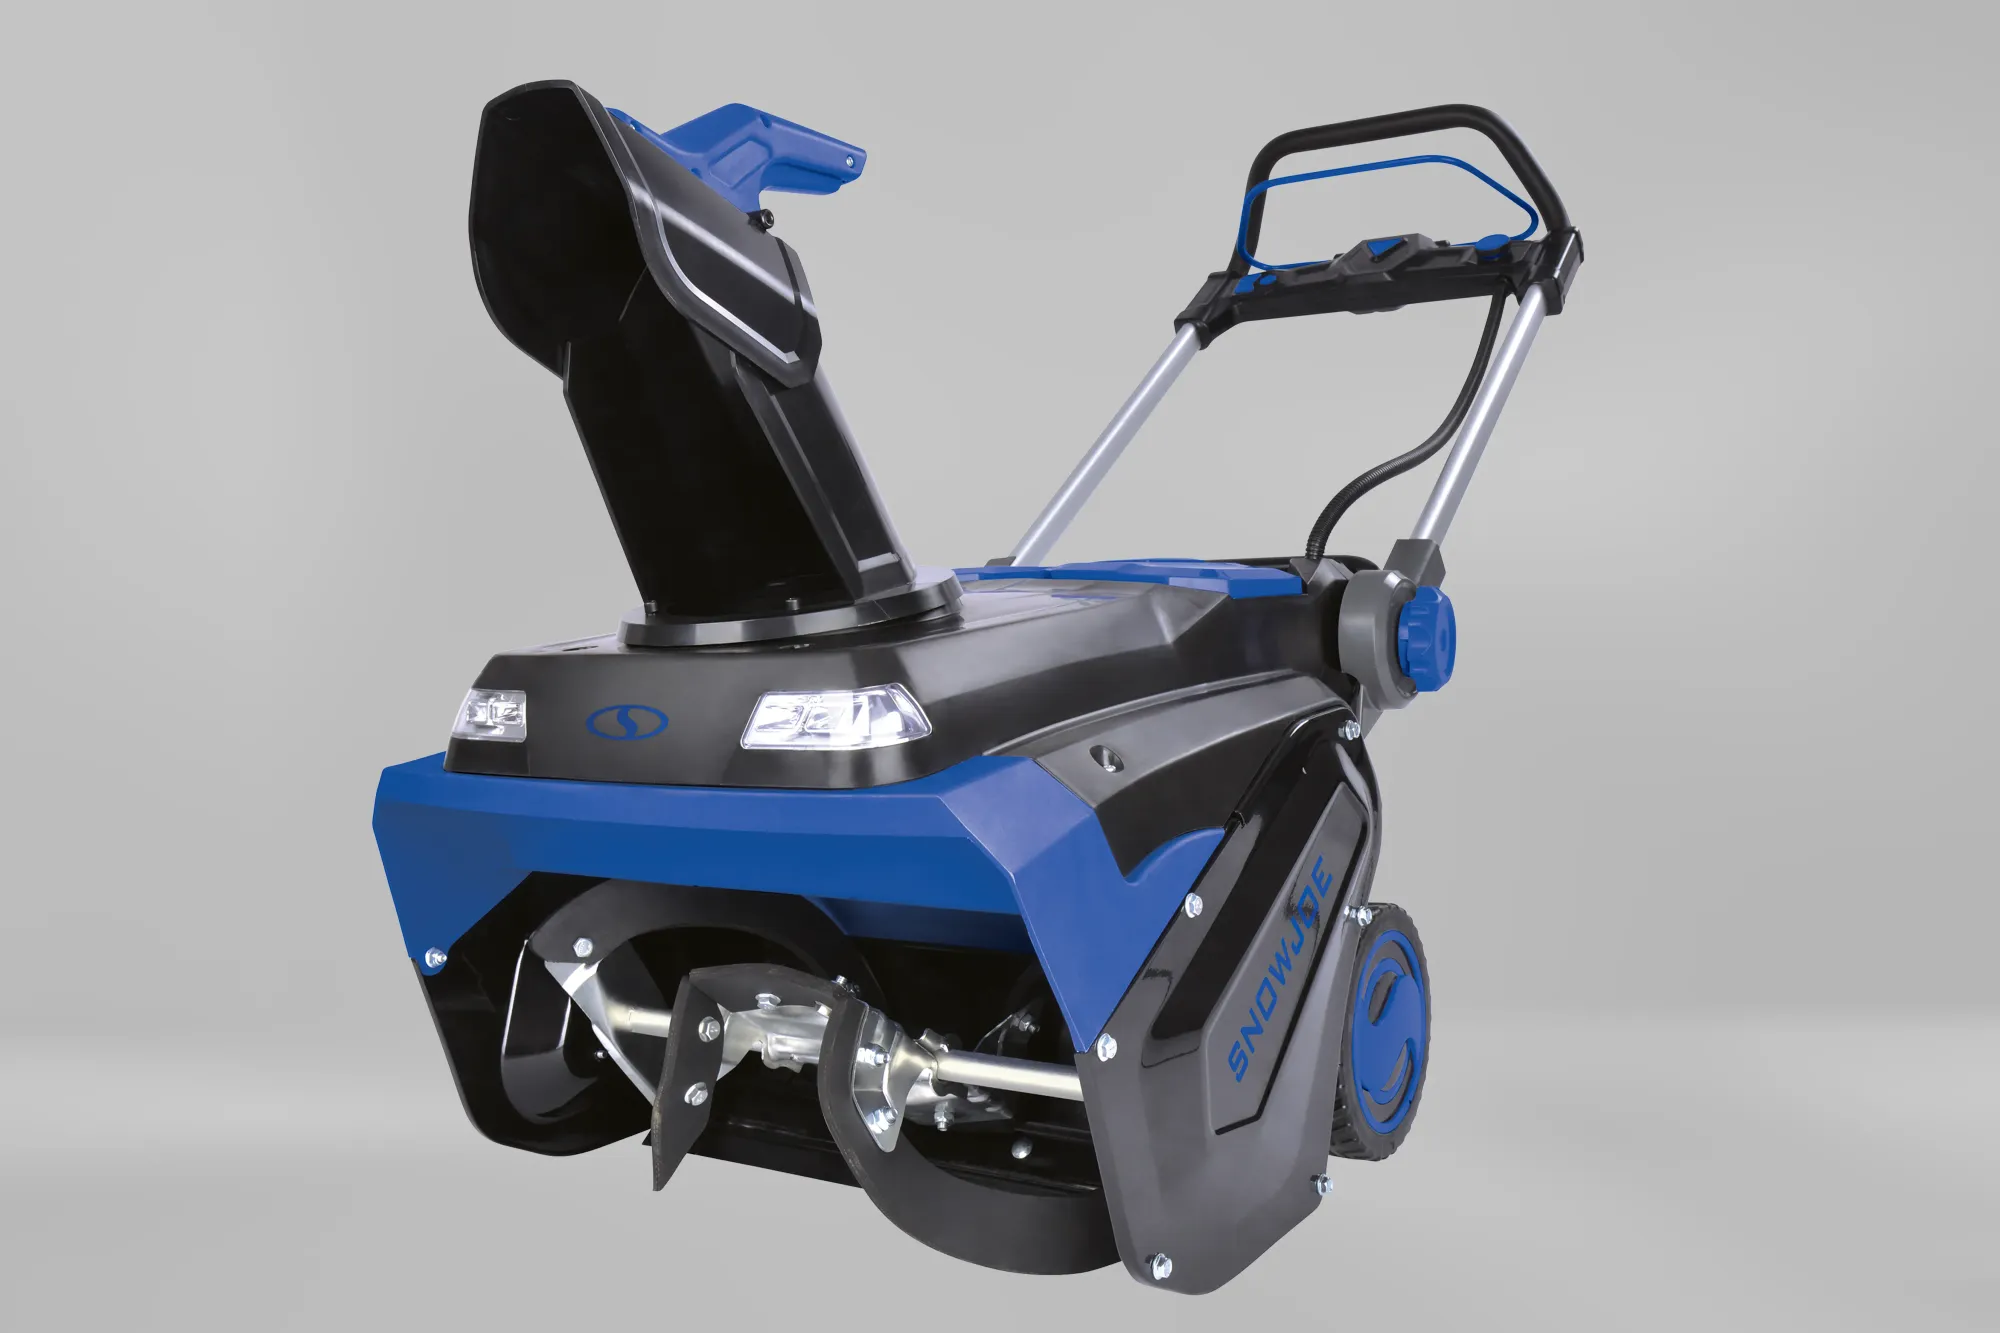 Best Snow Blower Under $500 - Ultimate buying guide